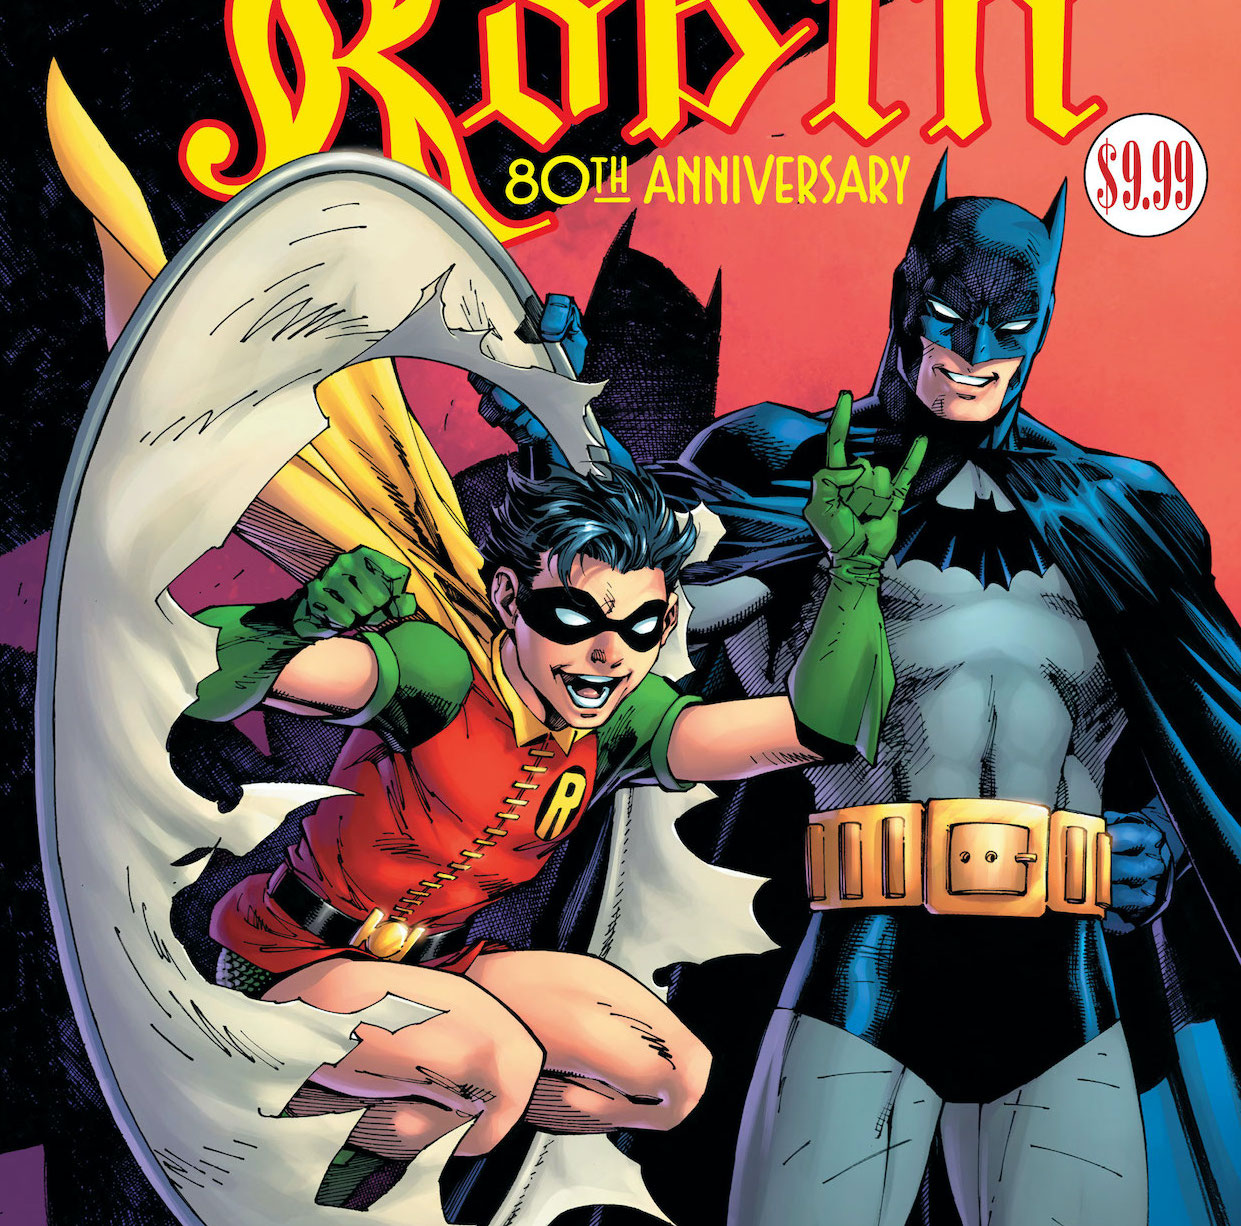 Throw up the horns for these decade spanning 'Robin 80th Anniversary' variant covers